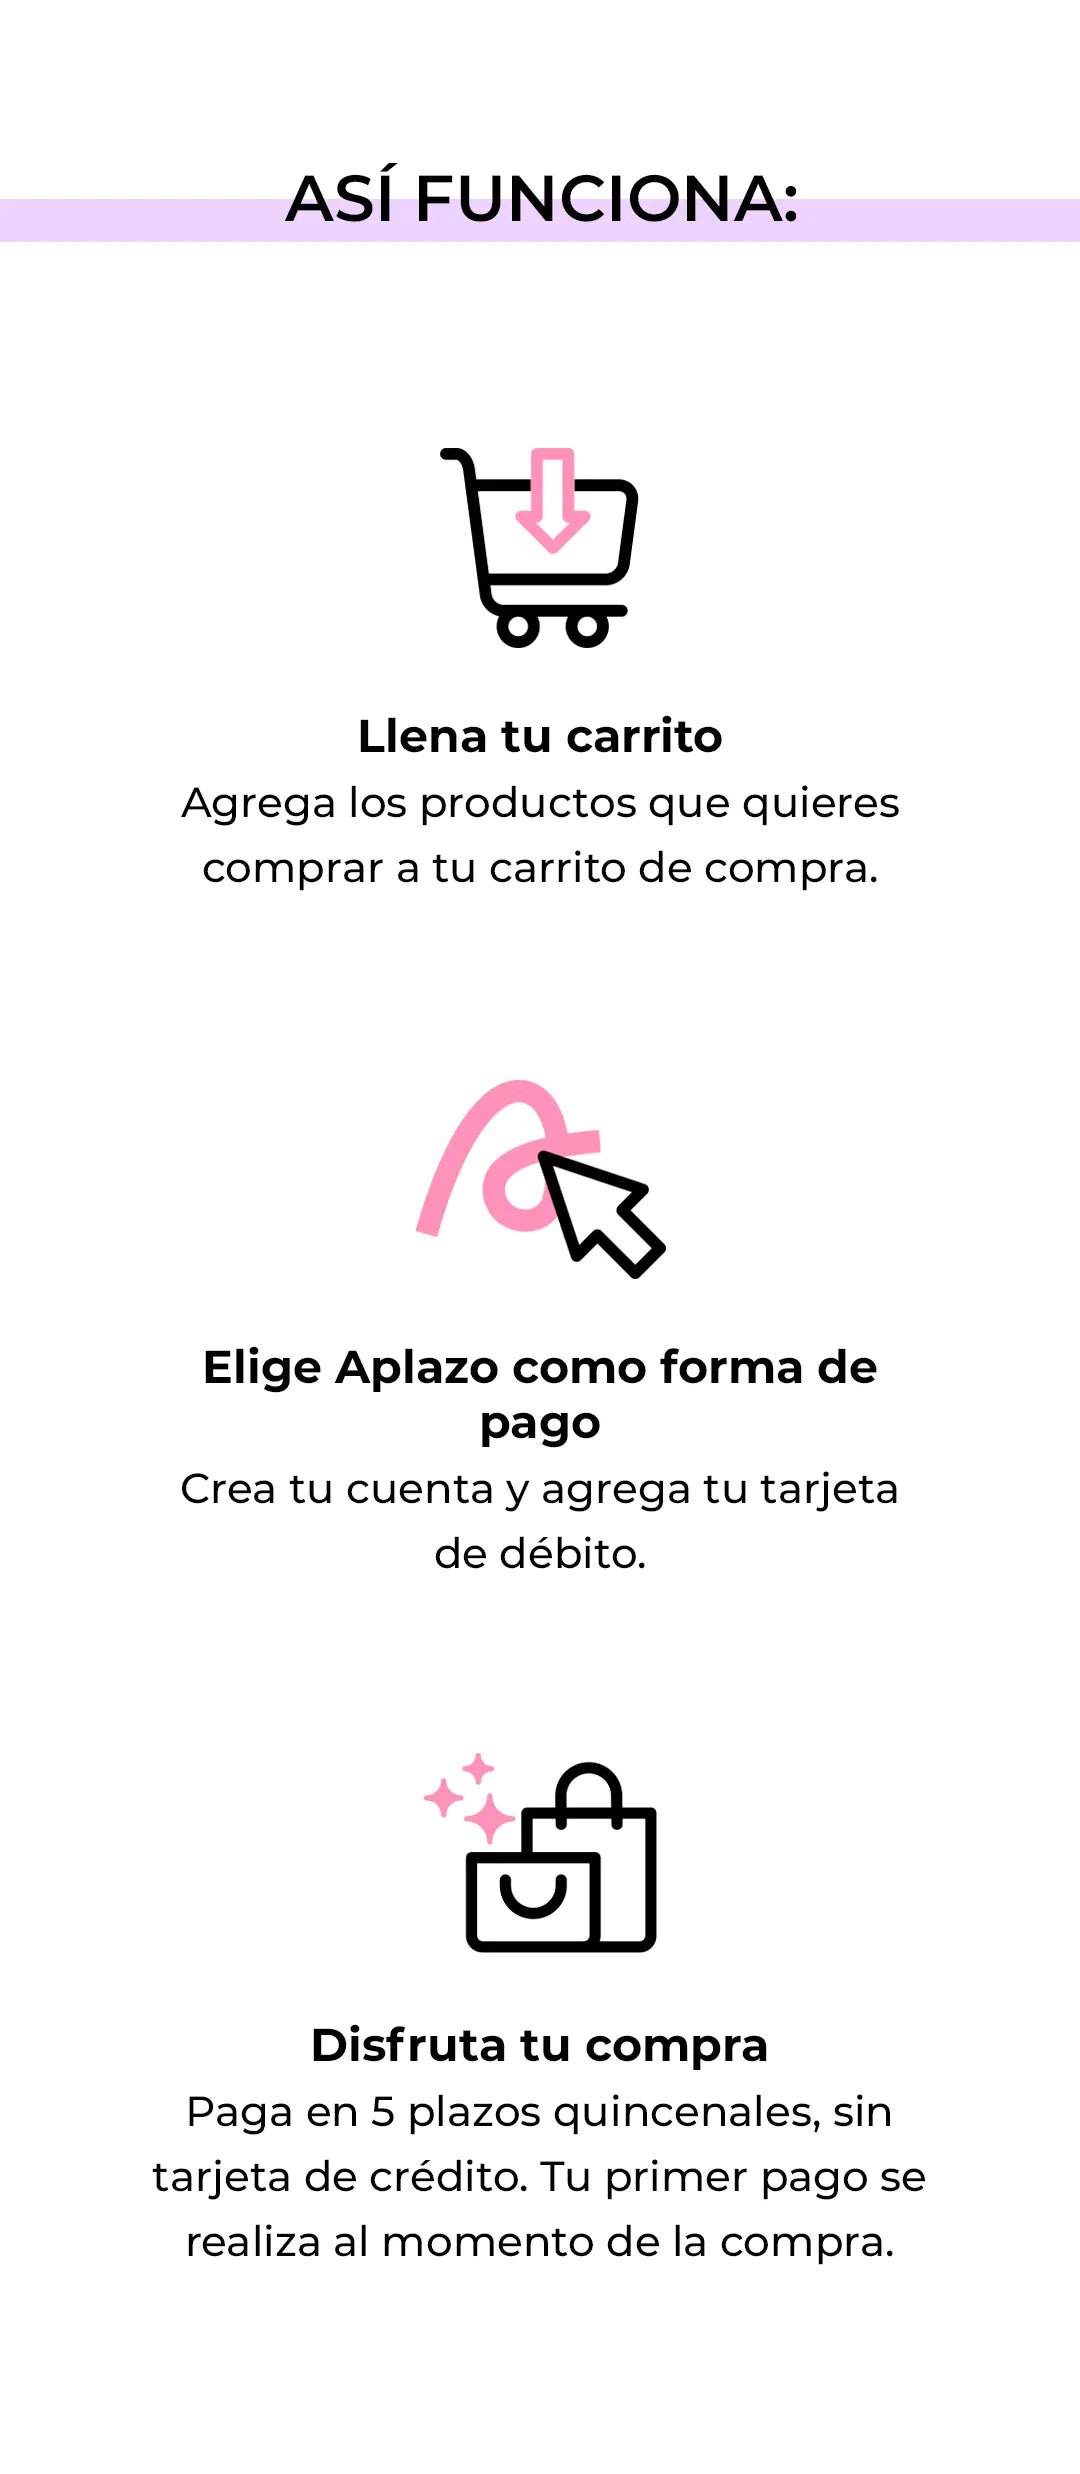 Infographic explaining a three-step shopping and payment process with icons, text in Spanish, and pink accents.